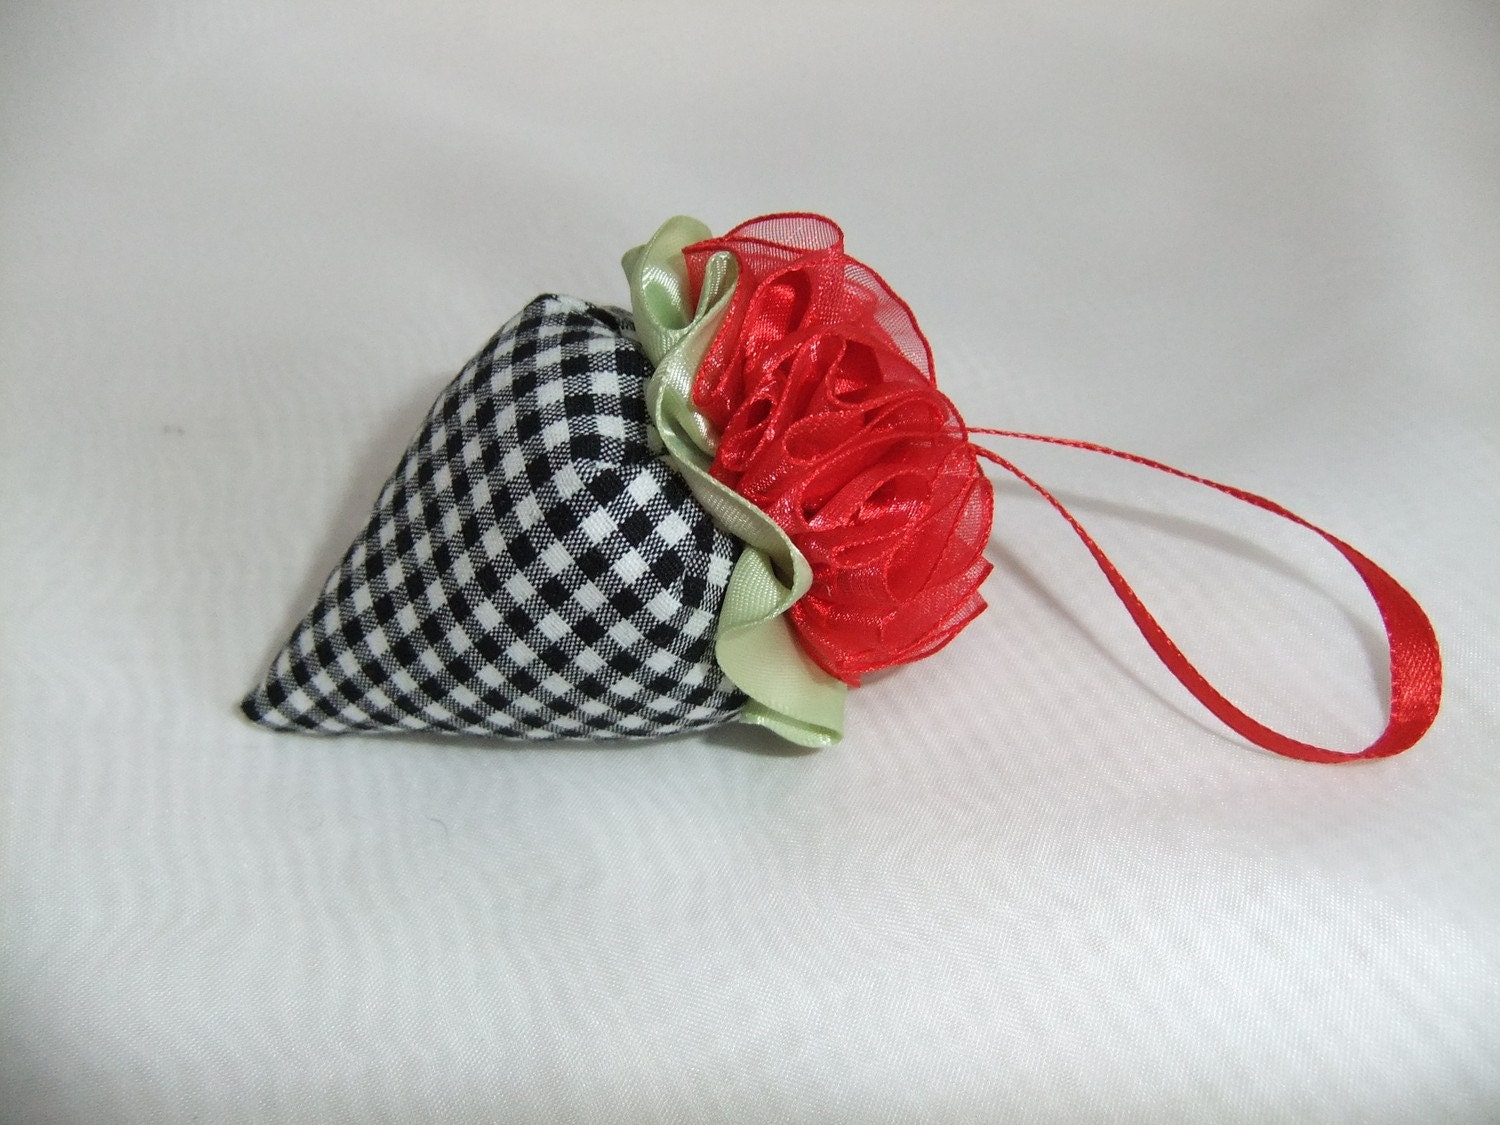 Lavender Filled Sachet/Ornament Pincushion - Strawberry Style - 3 inches Long